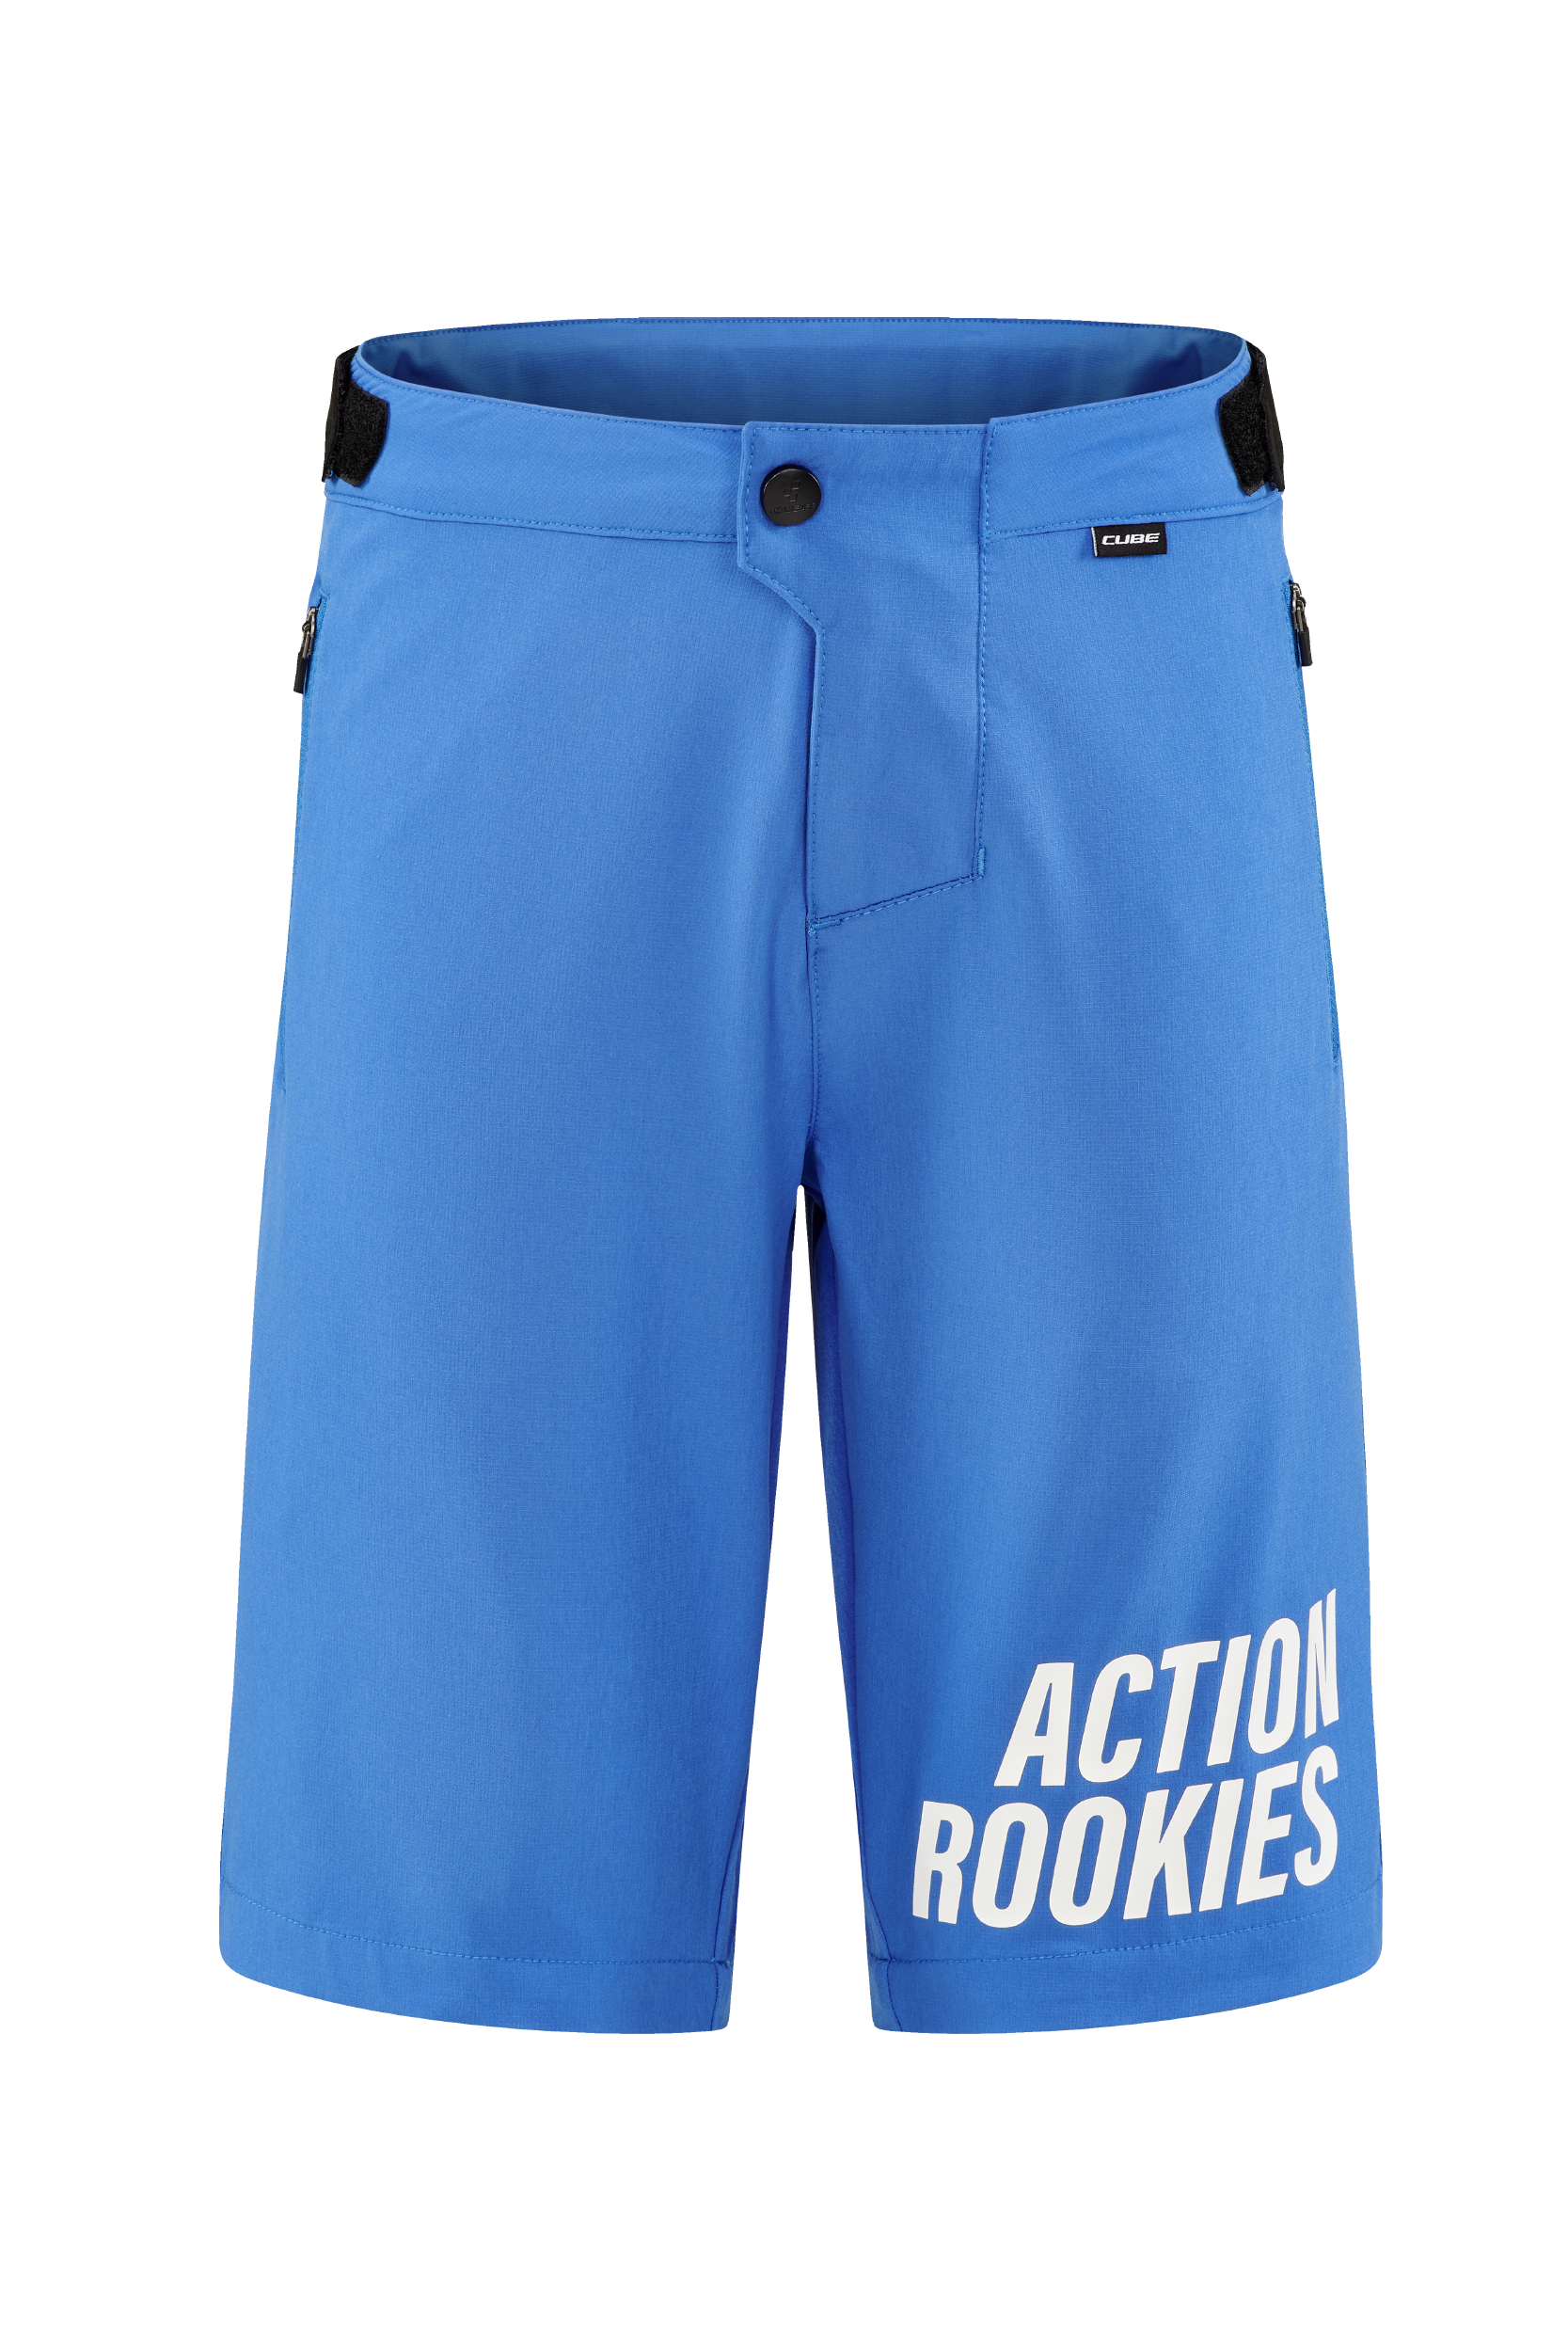 CUBE VERTEX Baggy Shorts ROOKIE X Actionteam inkl. Innenhose